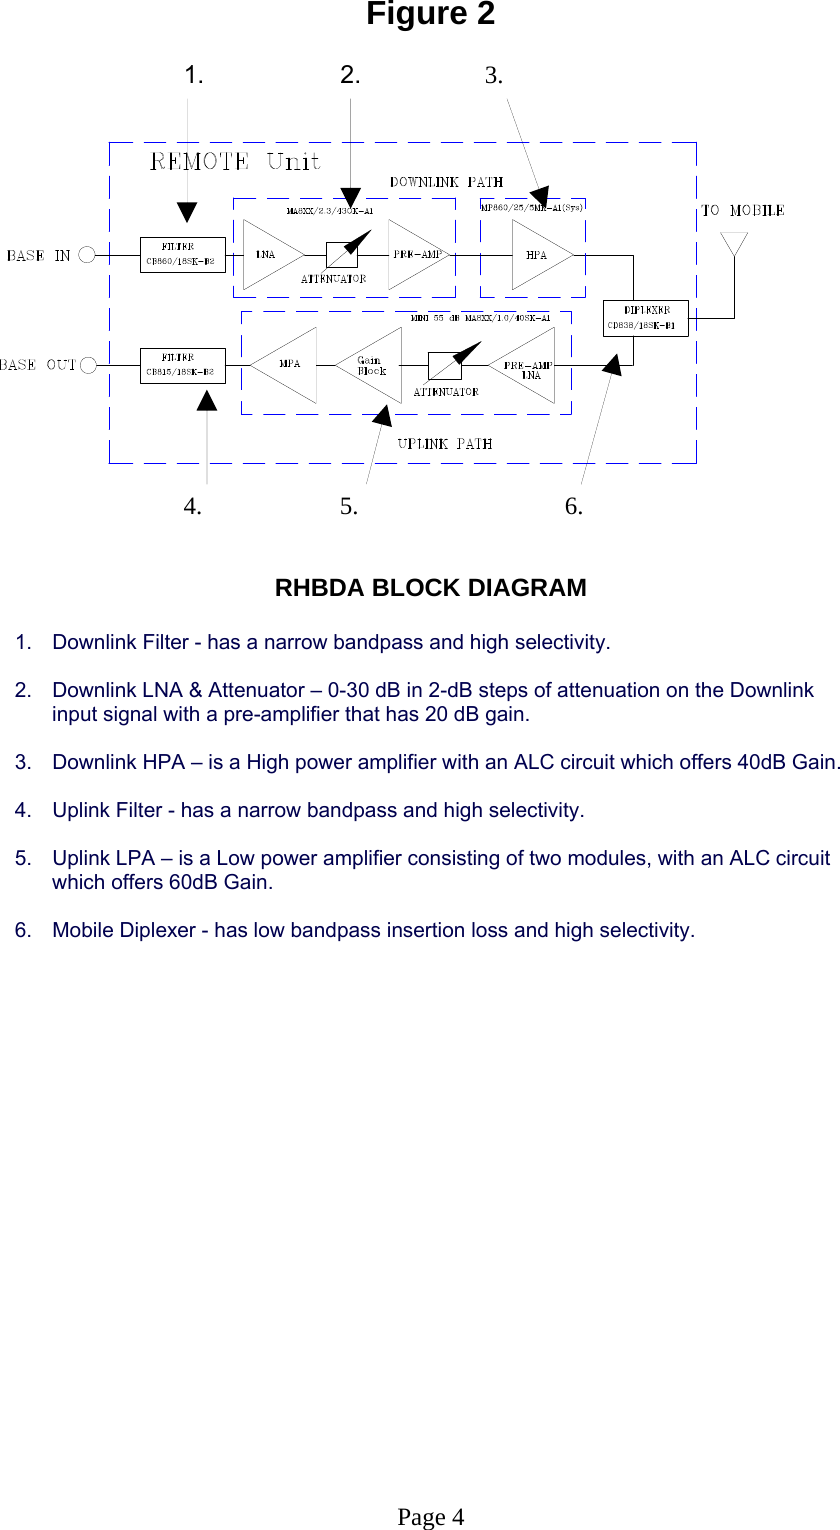 Figure 2   1.     2.              3.                                            4.                      5.                           6.                               RHBDA BLOCK DIAGRAM  1.  Downlink Filter - has a narrow bandpass and high selectivity.   2.  Downlink LNA &amp; Attenuator – 0-30 dB in 2-dB steps of attenuation on the Downlink input signal with a pre-amplifier that has 20 dB gain.  3.  Downlink HPA – is a High power amplifier with an ALC circuit which offers 40dB Gain.  4.  Uplink Filter - has a narrow bandpass and high selectivity.   5.  Uplink LPA – is a Low power amplifier consisting of two modules, with an ALC circuit which offers 60dB Gain.  6.  Mobile Diplexer - has low bandpass insertion loss and high selectivity.                   Page 4 